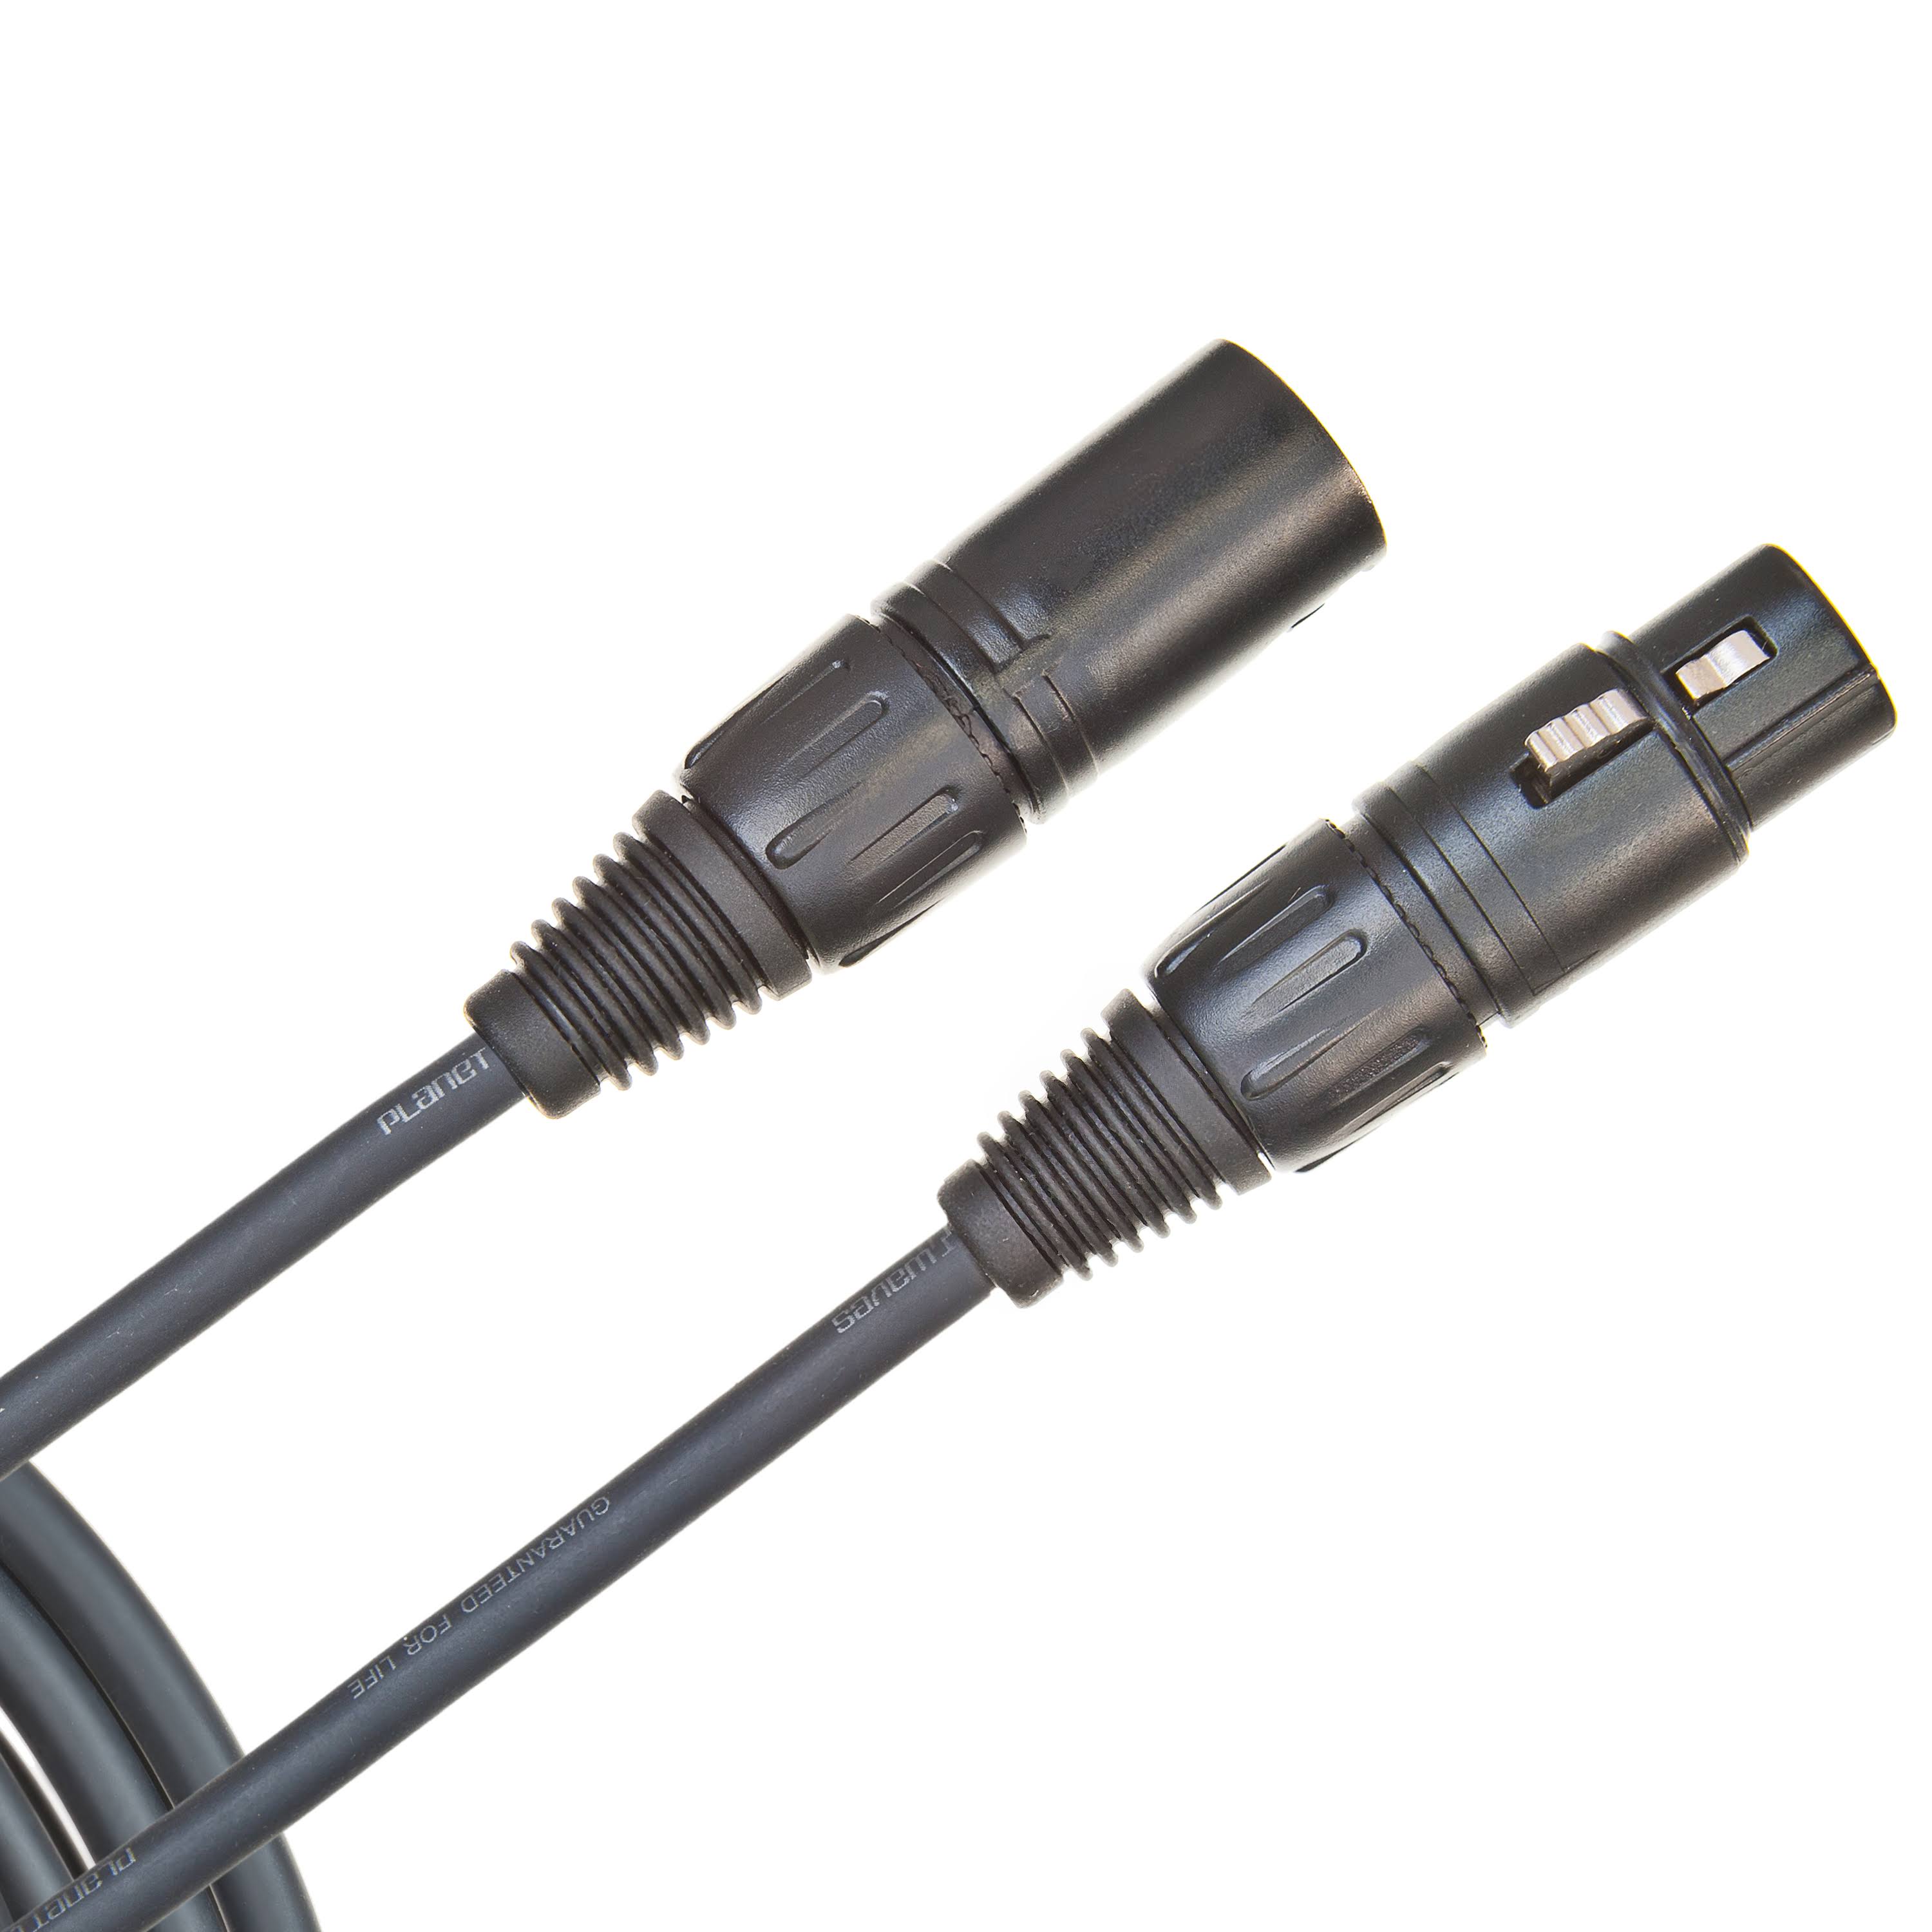 Planet Waves Classic Series XLR Microphone Cable